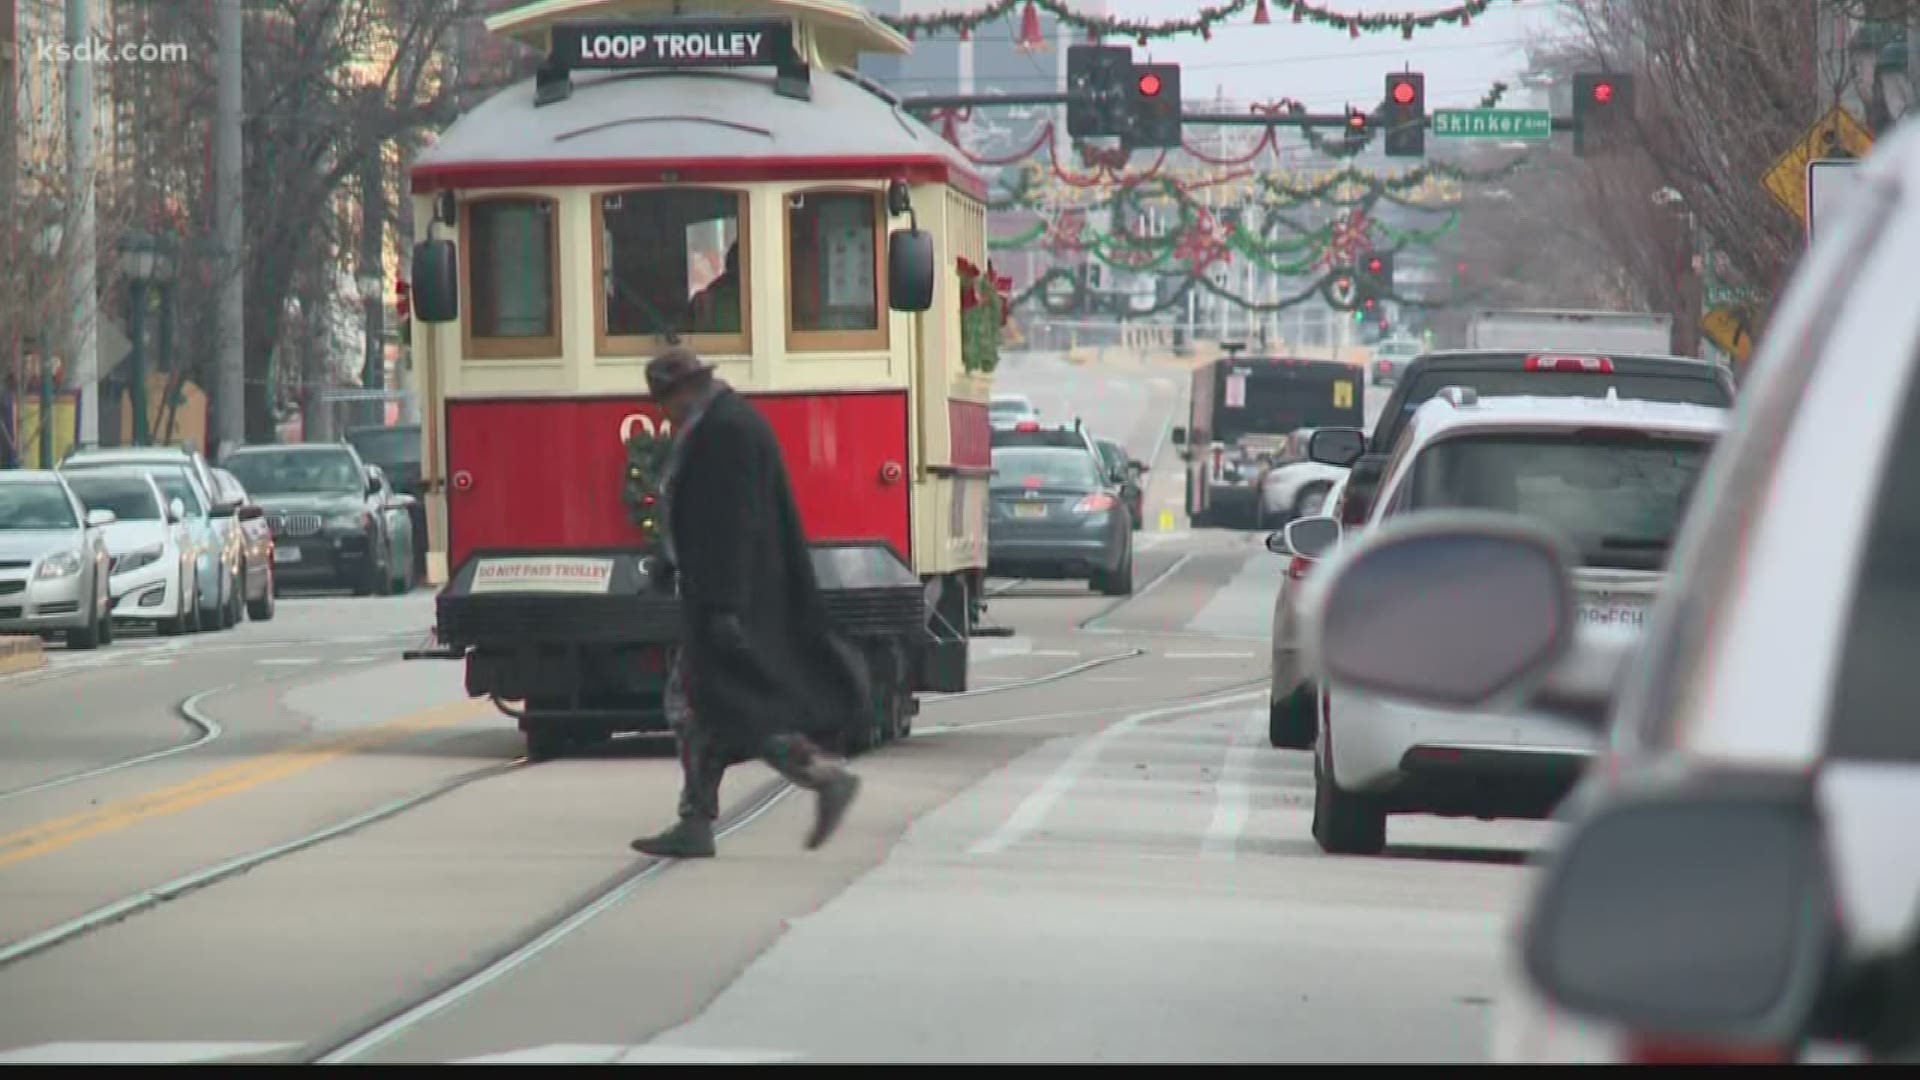 A spokesperson confirmed to 5 On Your Side the company will end operations of the trolley on Dec. 29